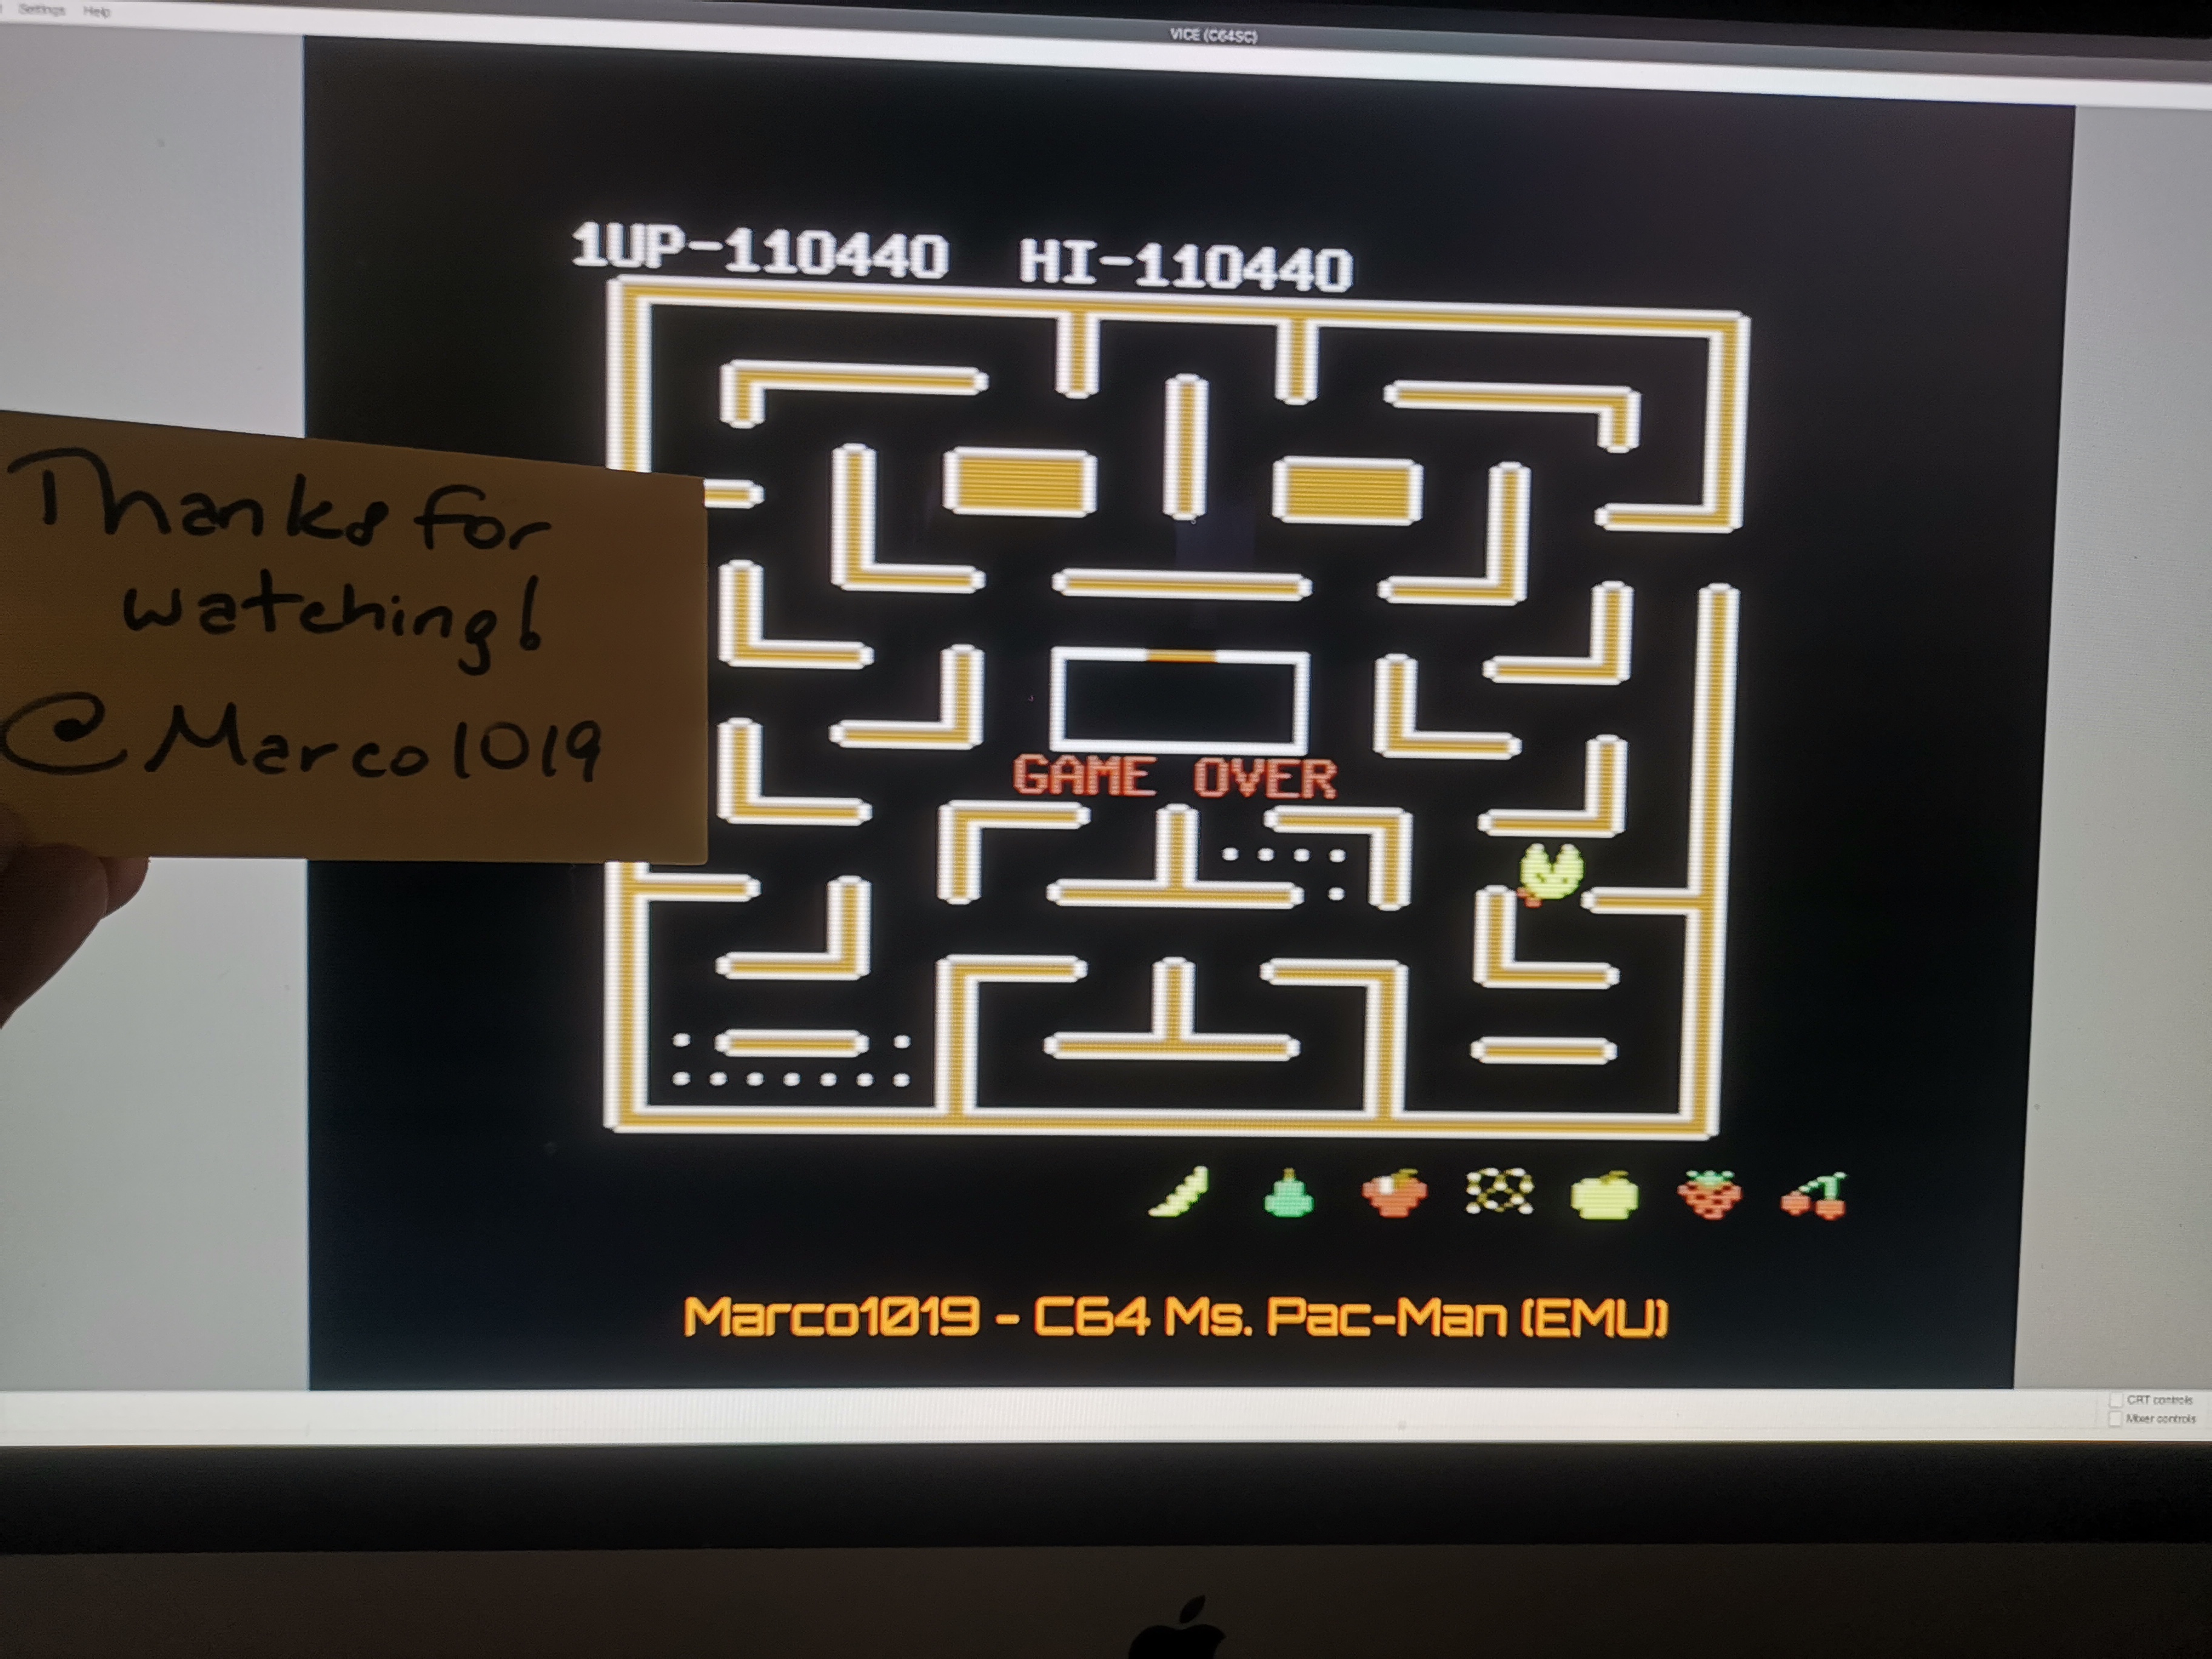 Marco1019: Ms. Pac-Man [Pear Start] (Commodore 64 Emulated) 110,440 points on 2021-01-27 20:01:12